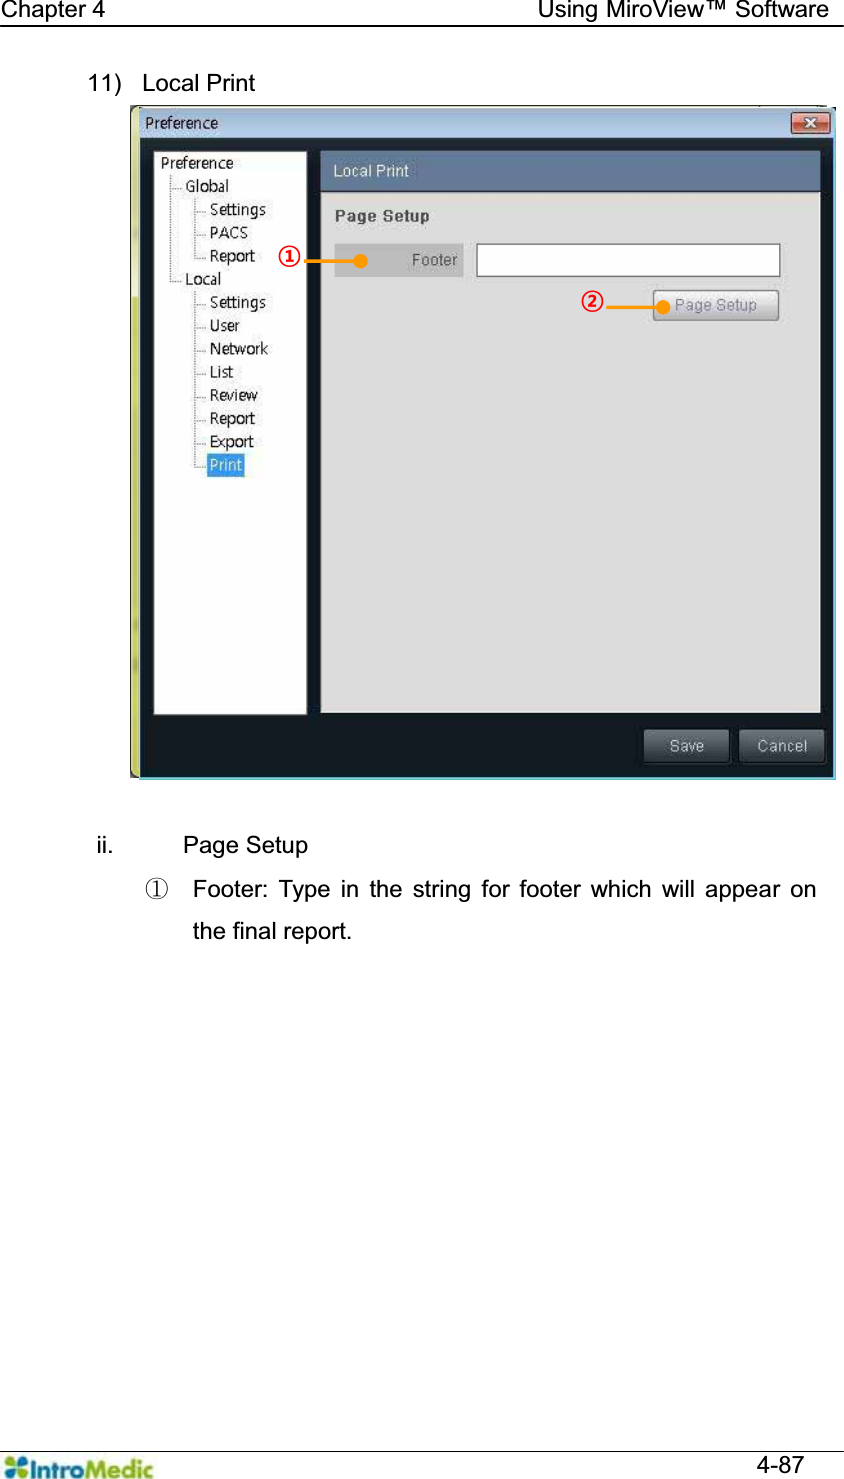   Chapter 4                                    Using 0LUR9LHZ Software  4-87 11)   Local Print  ii. Page Setup ཛ  Footer: Type in the string for footer which will appear on the final report. ¢ £ 